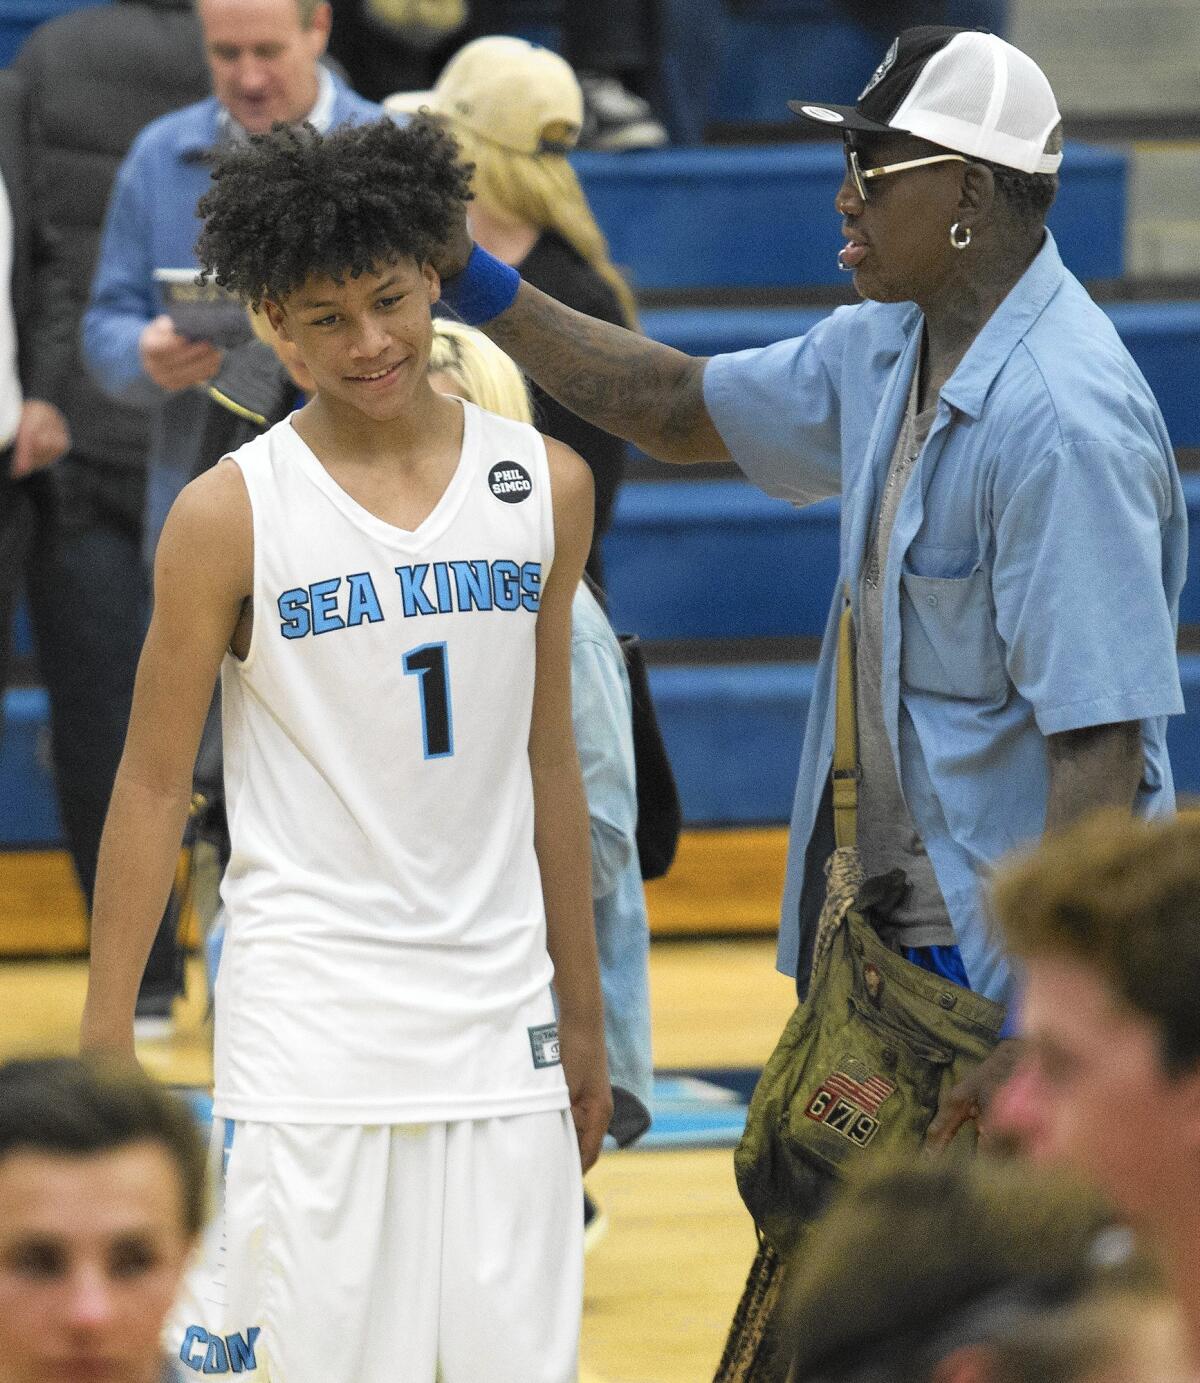 Former NBA player Dennis Rodman messes D.J. Rodman's hair after the Sea Kings defeated Shadow Hills in a CIF Southern Section Division 3A first-round playoff game on Wednesday.